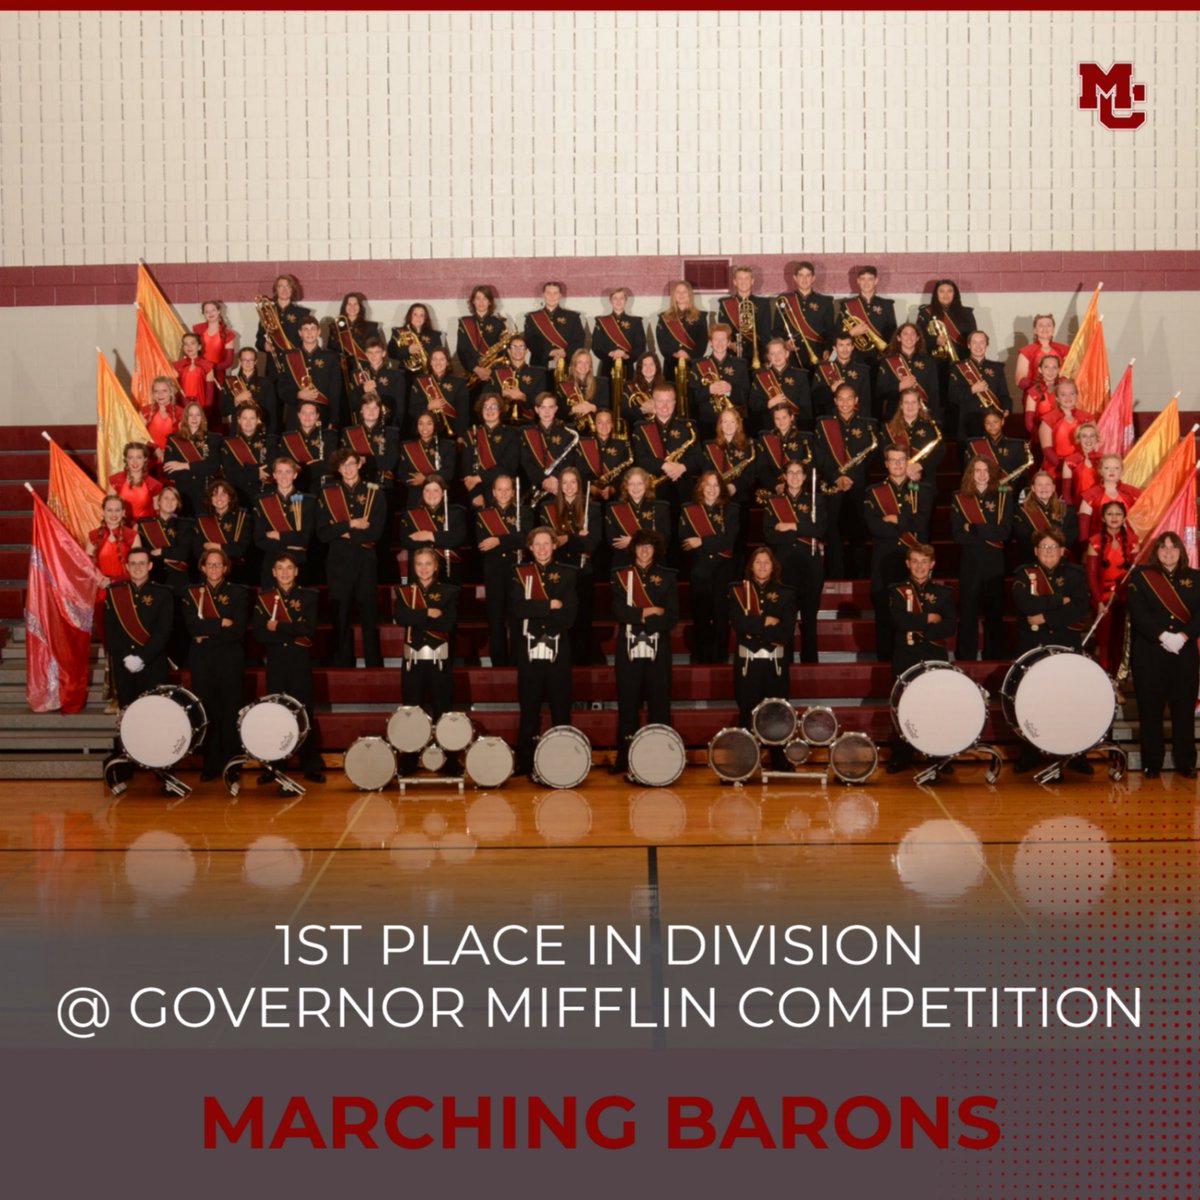 Congratulations to our Marching Barons for achieving 1st place in their division at this past weekend's competition! @ManheimCentral